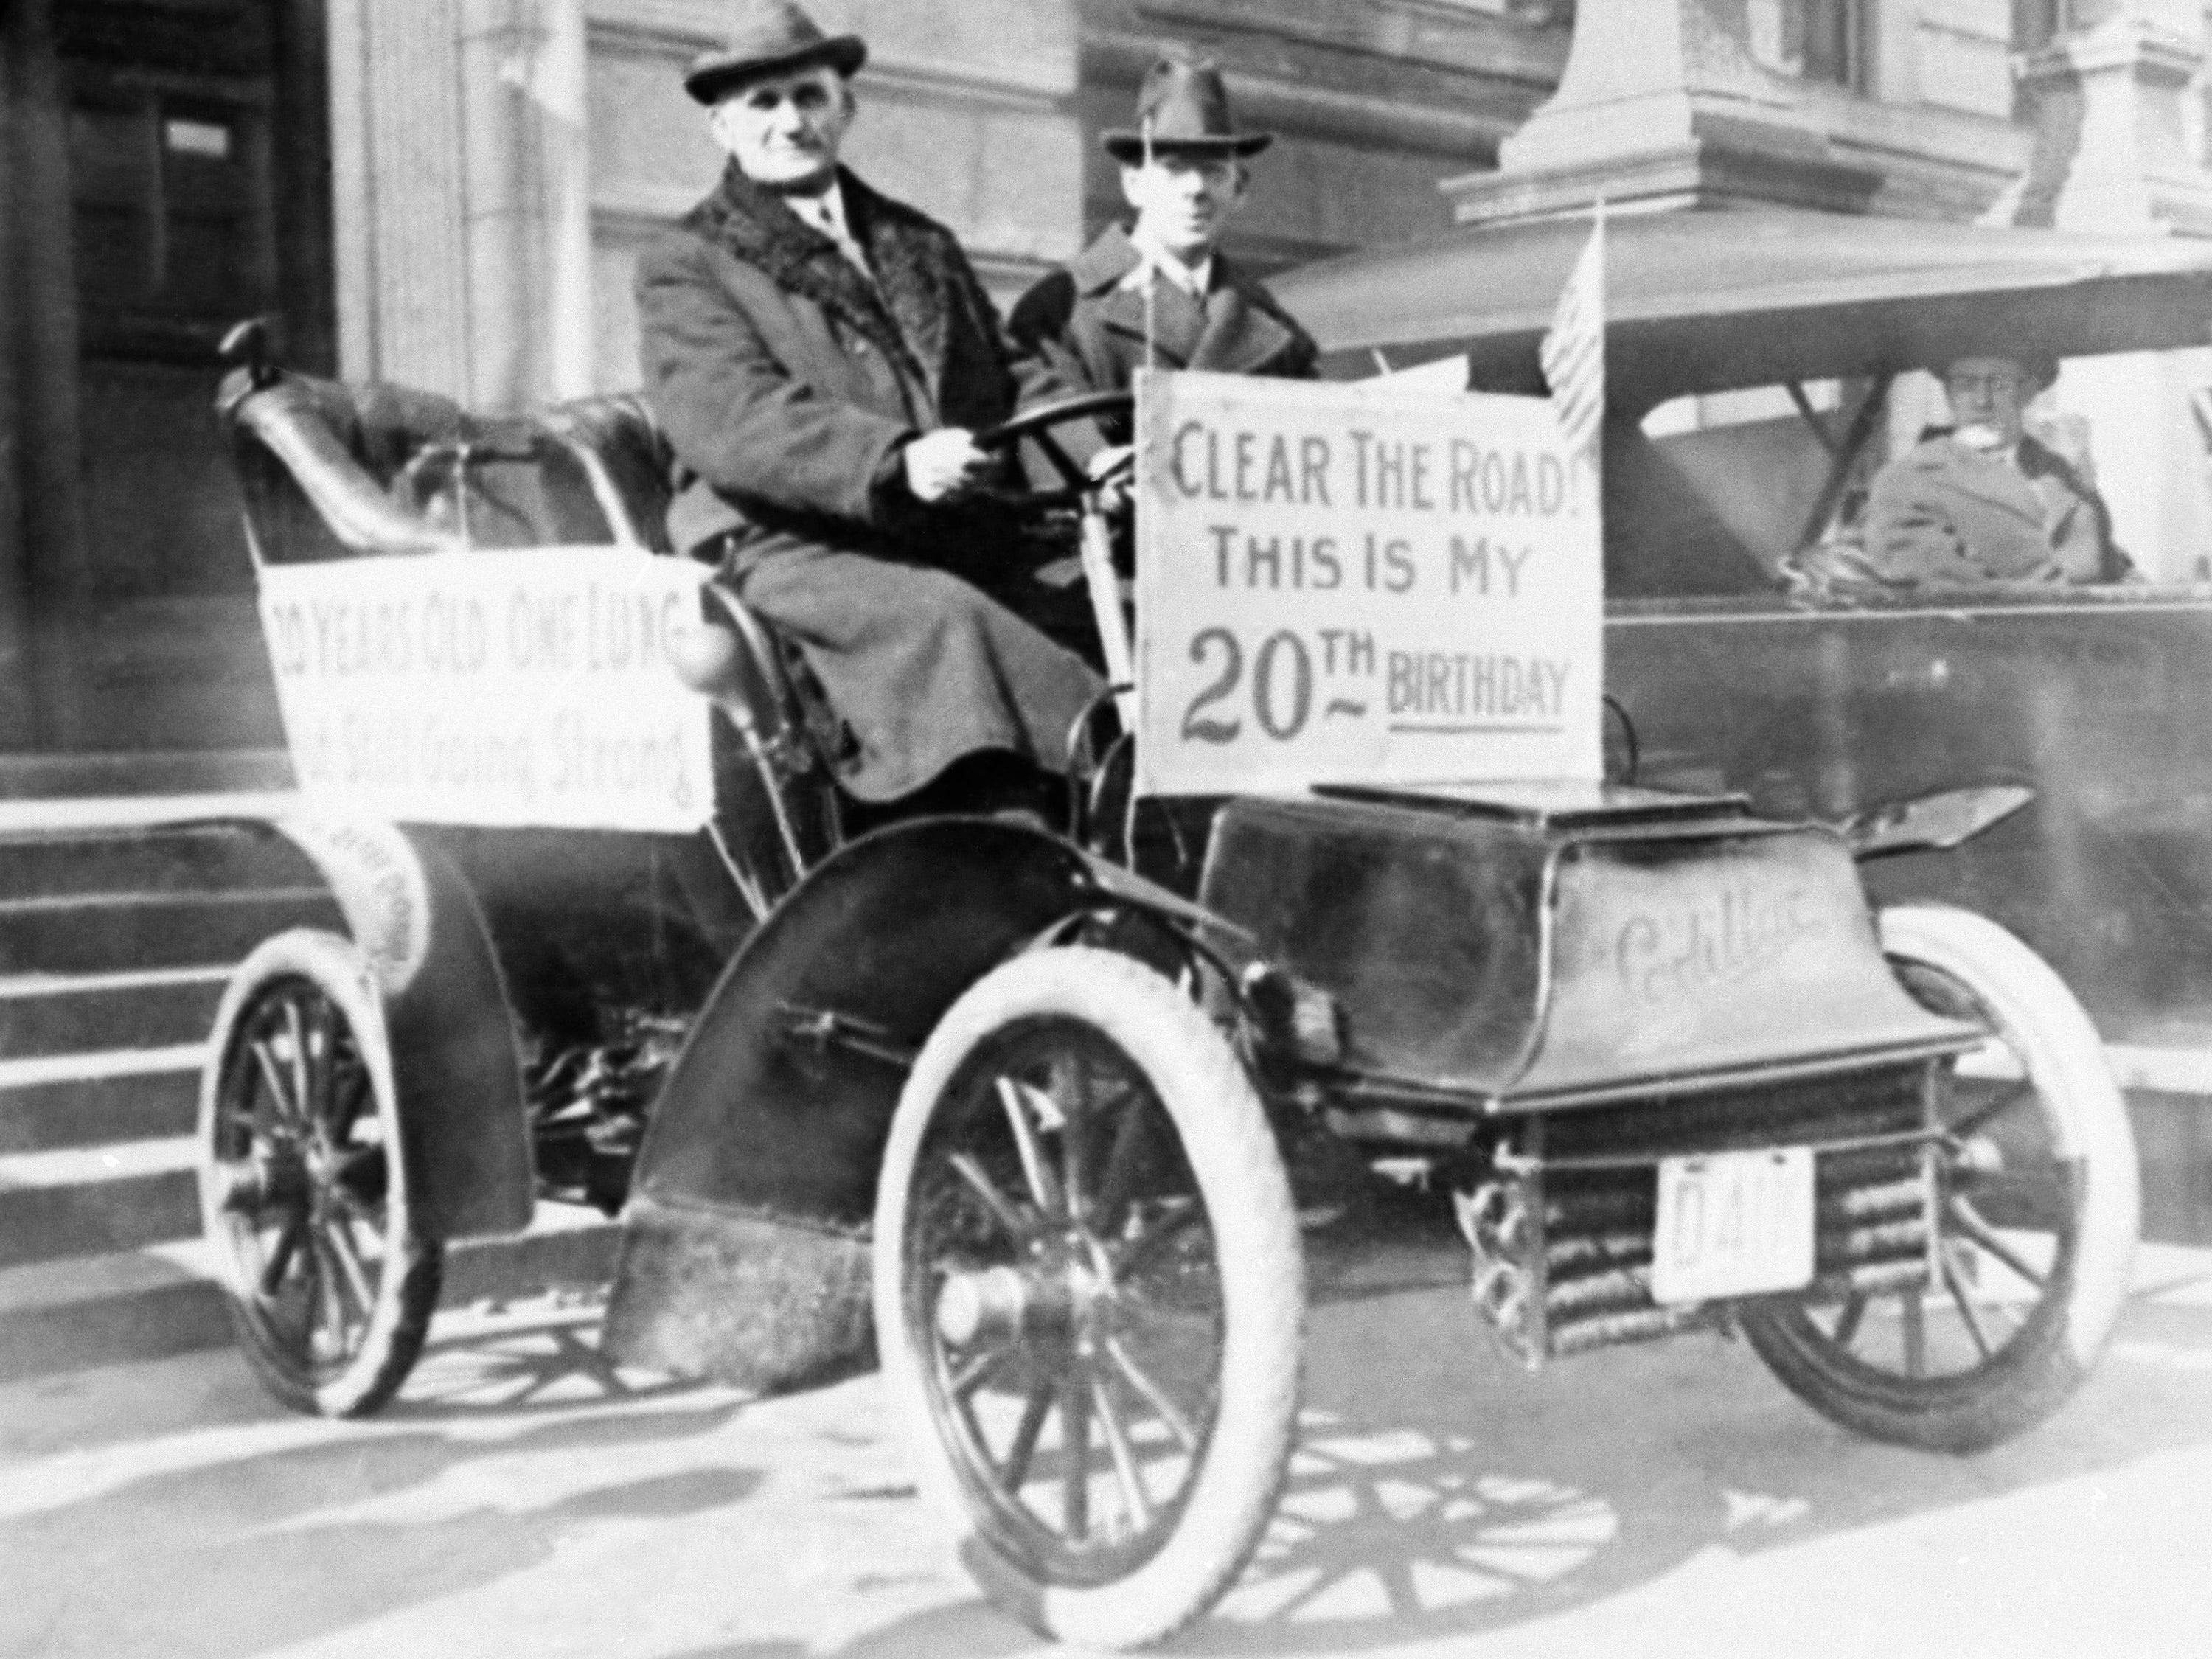 <p>Mayor Charles F. Sullivan of Worcester, Massachusetts, held up a sign that said, "Clear the road! This is my 20th birthday" while taking a drive in 1923.</p>